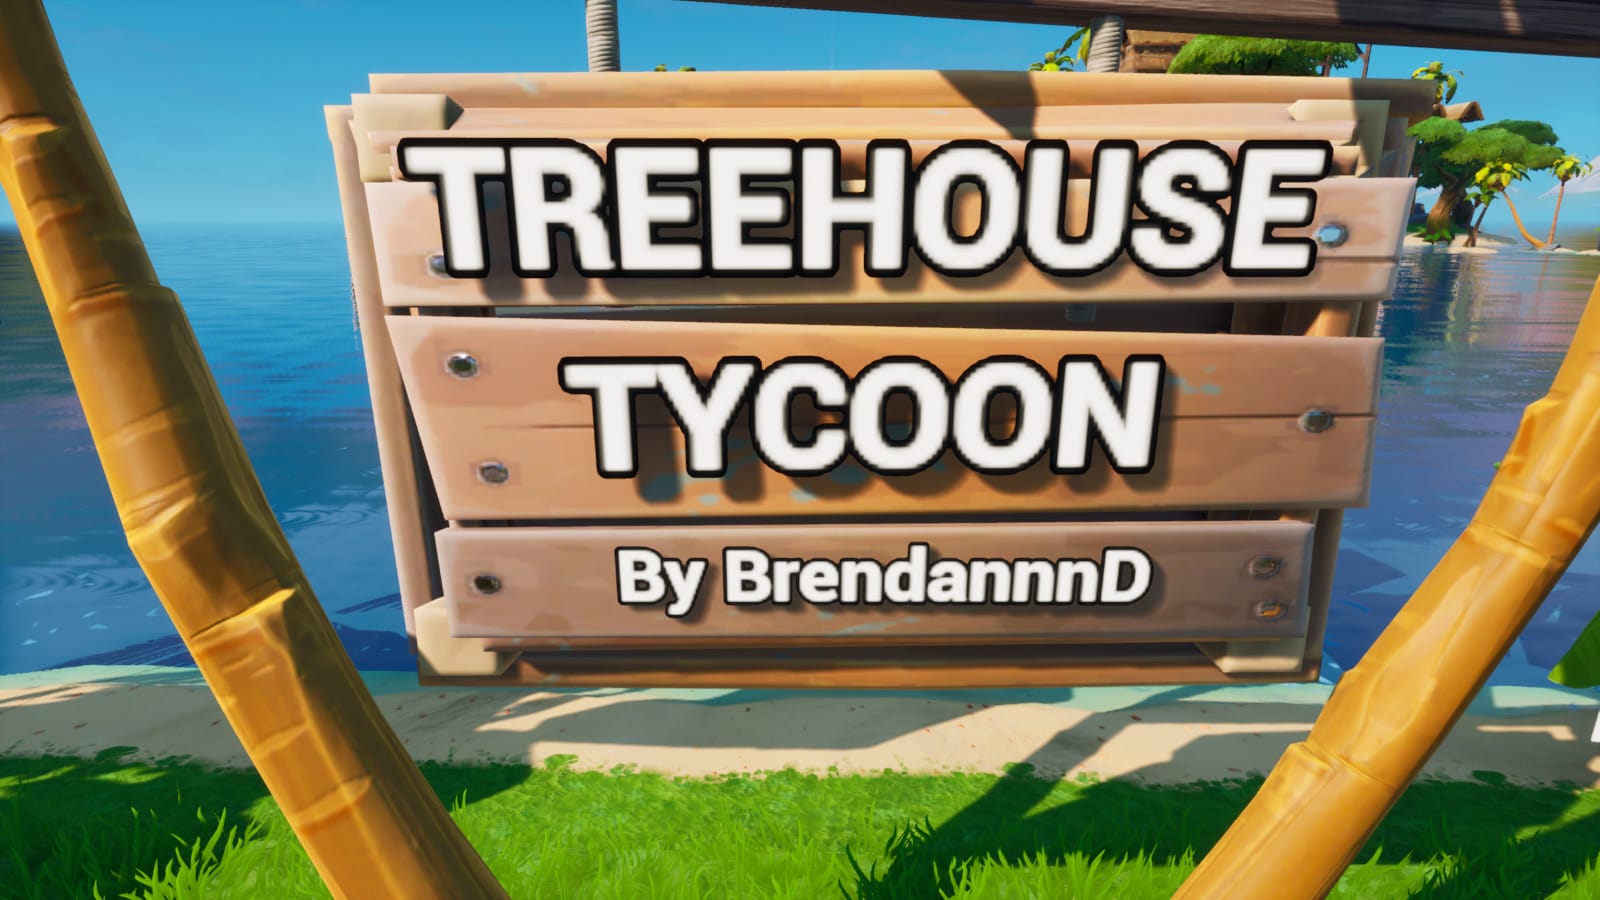 Treehouse Tycoon Brendannnd Fortnite Creative Map Code